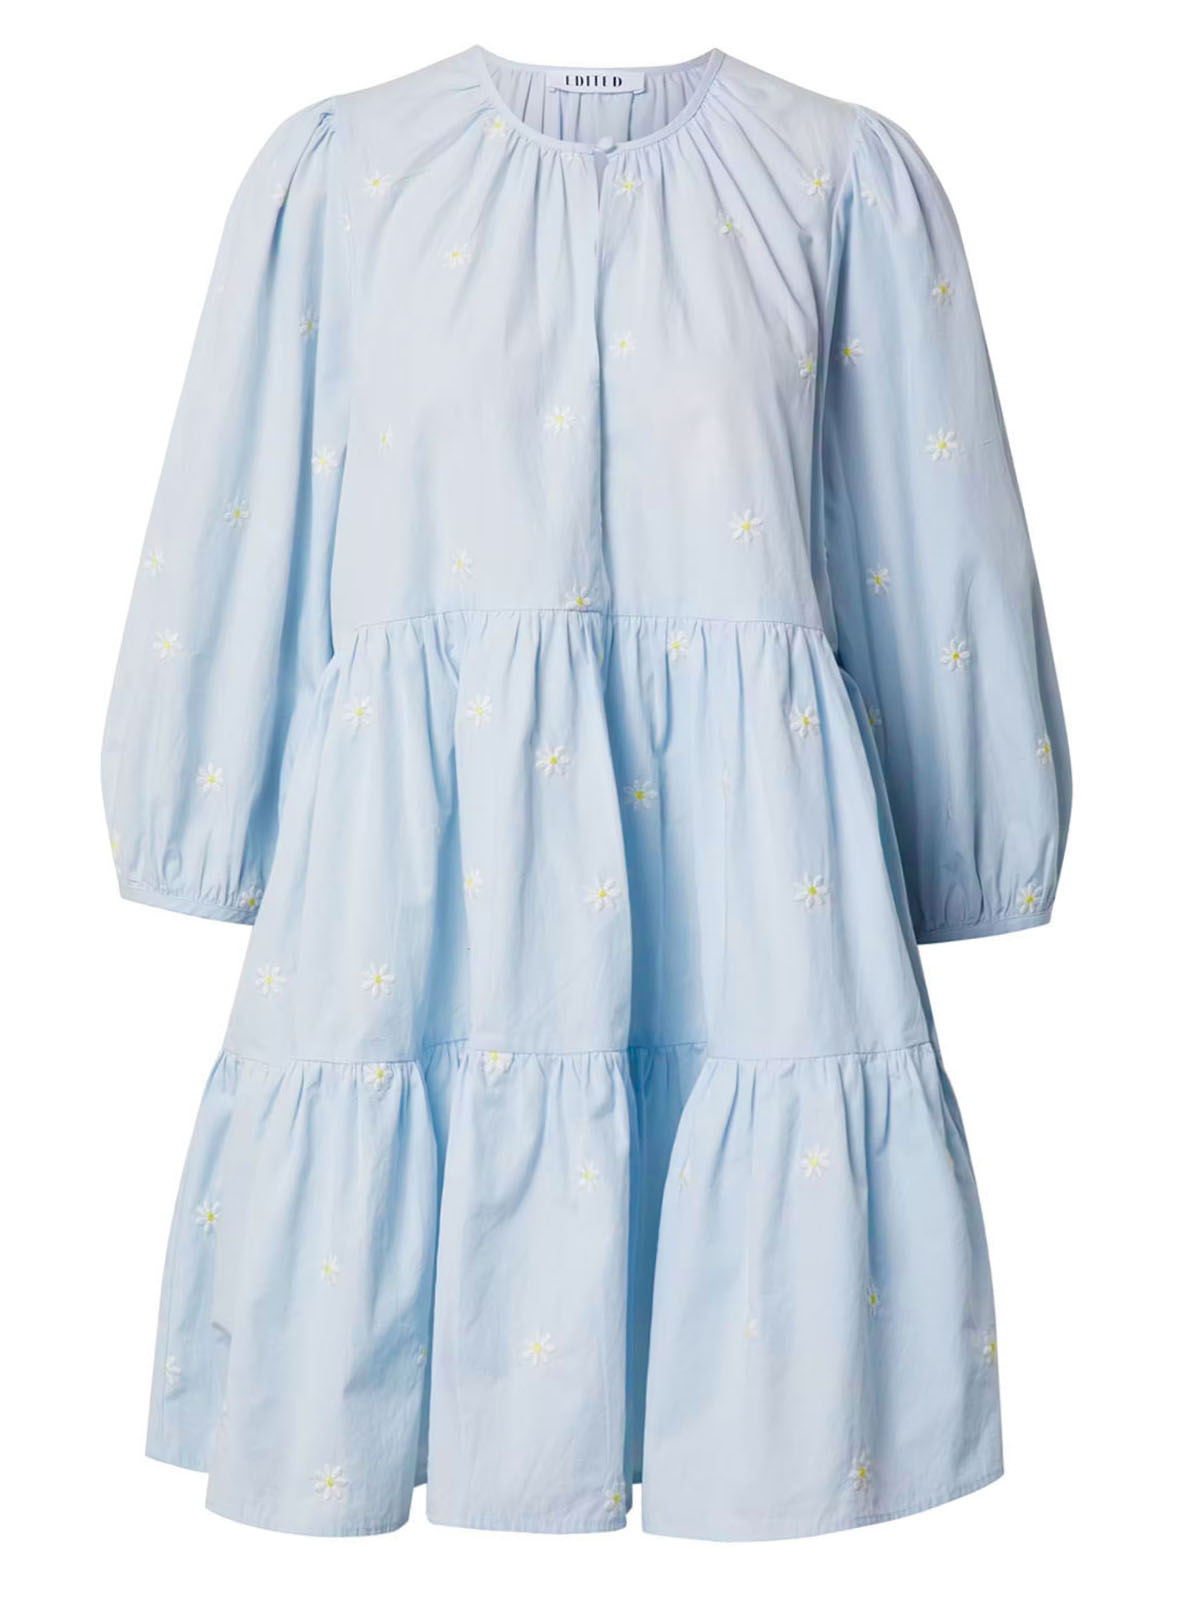 Edited - - Edited BABY-BLUE Joanna Daisy Embroidered Tiered Dress ...